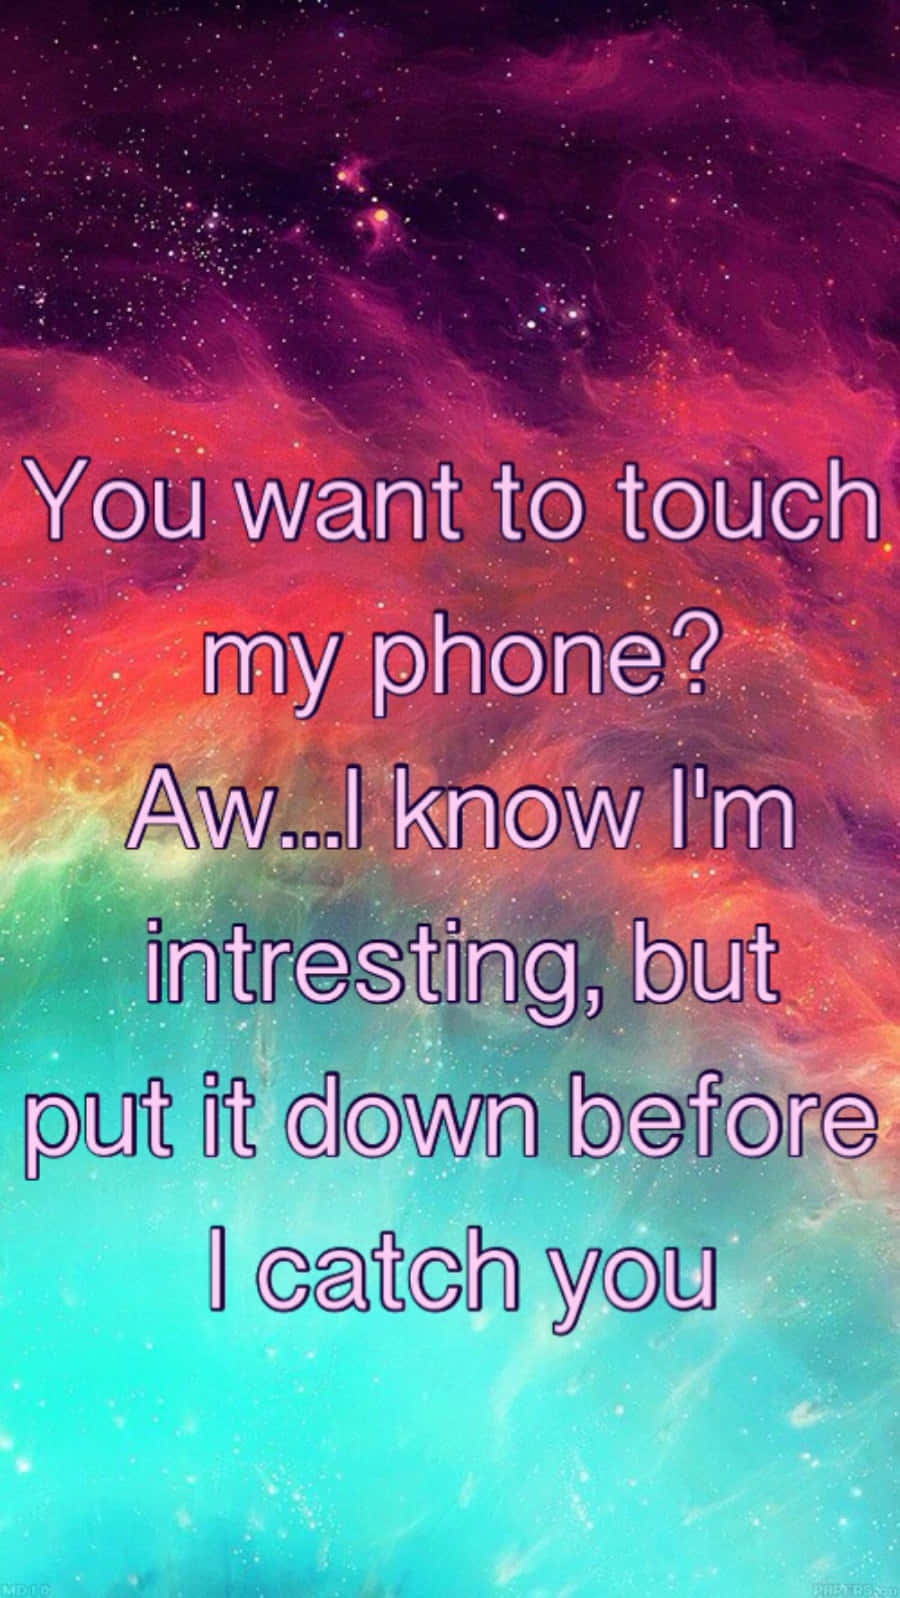 A Colorful Background With The Words, You Want To Touch My Phone Aw I Know I'm Interested Before I Put Catch You Wallpaper